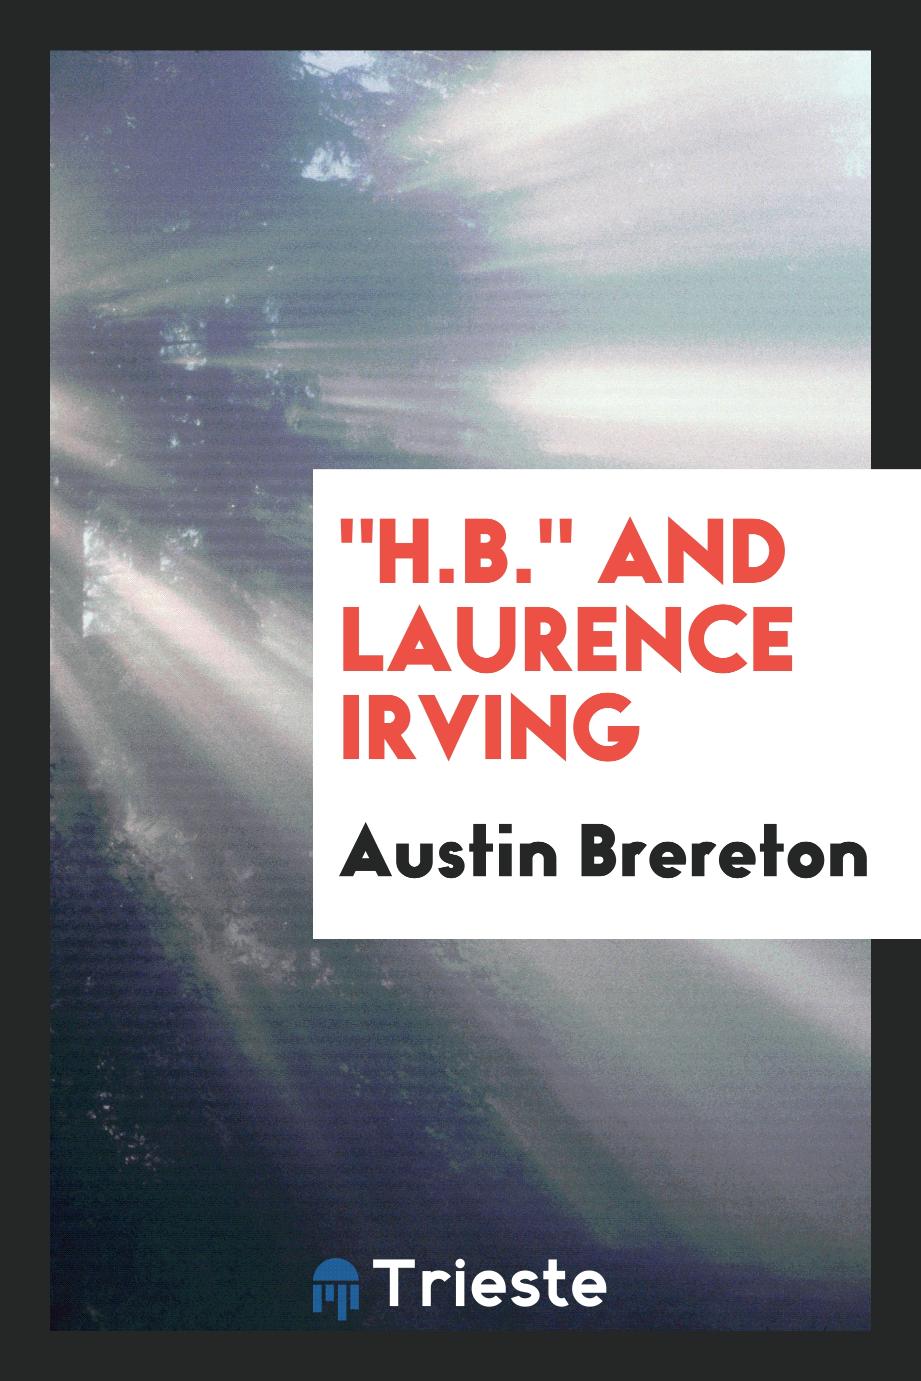 "H.B." and Laurence Irving